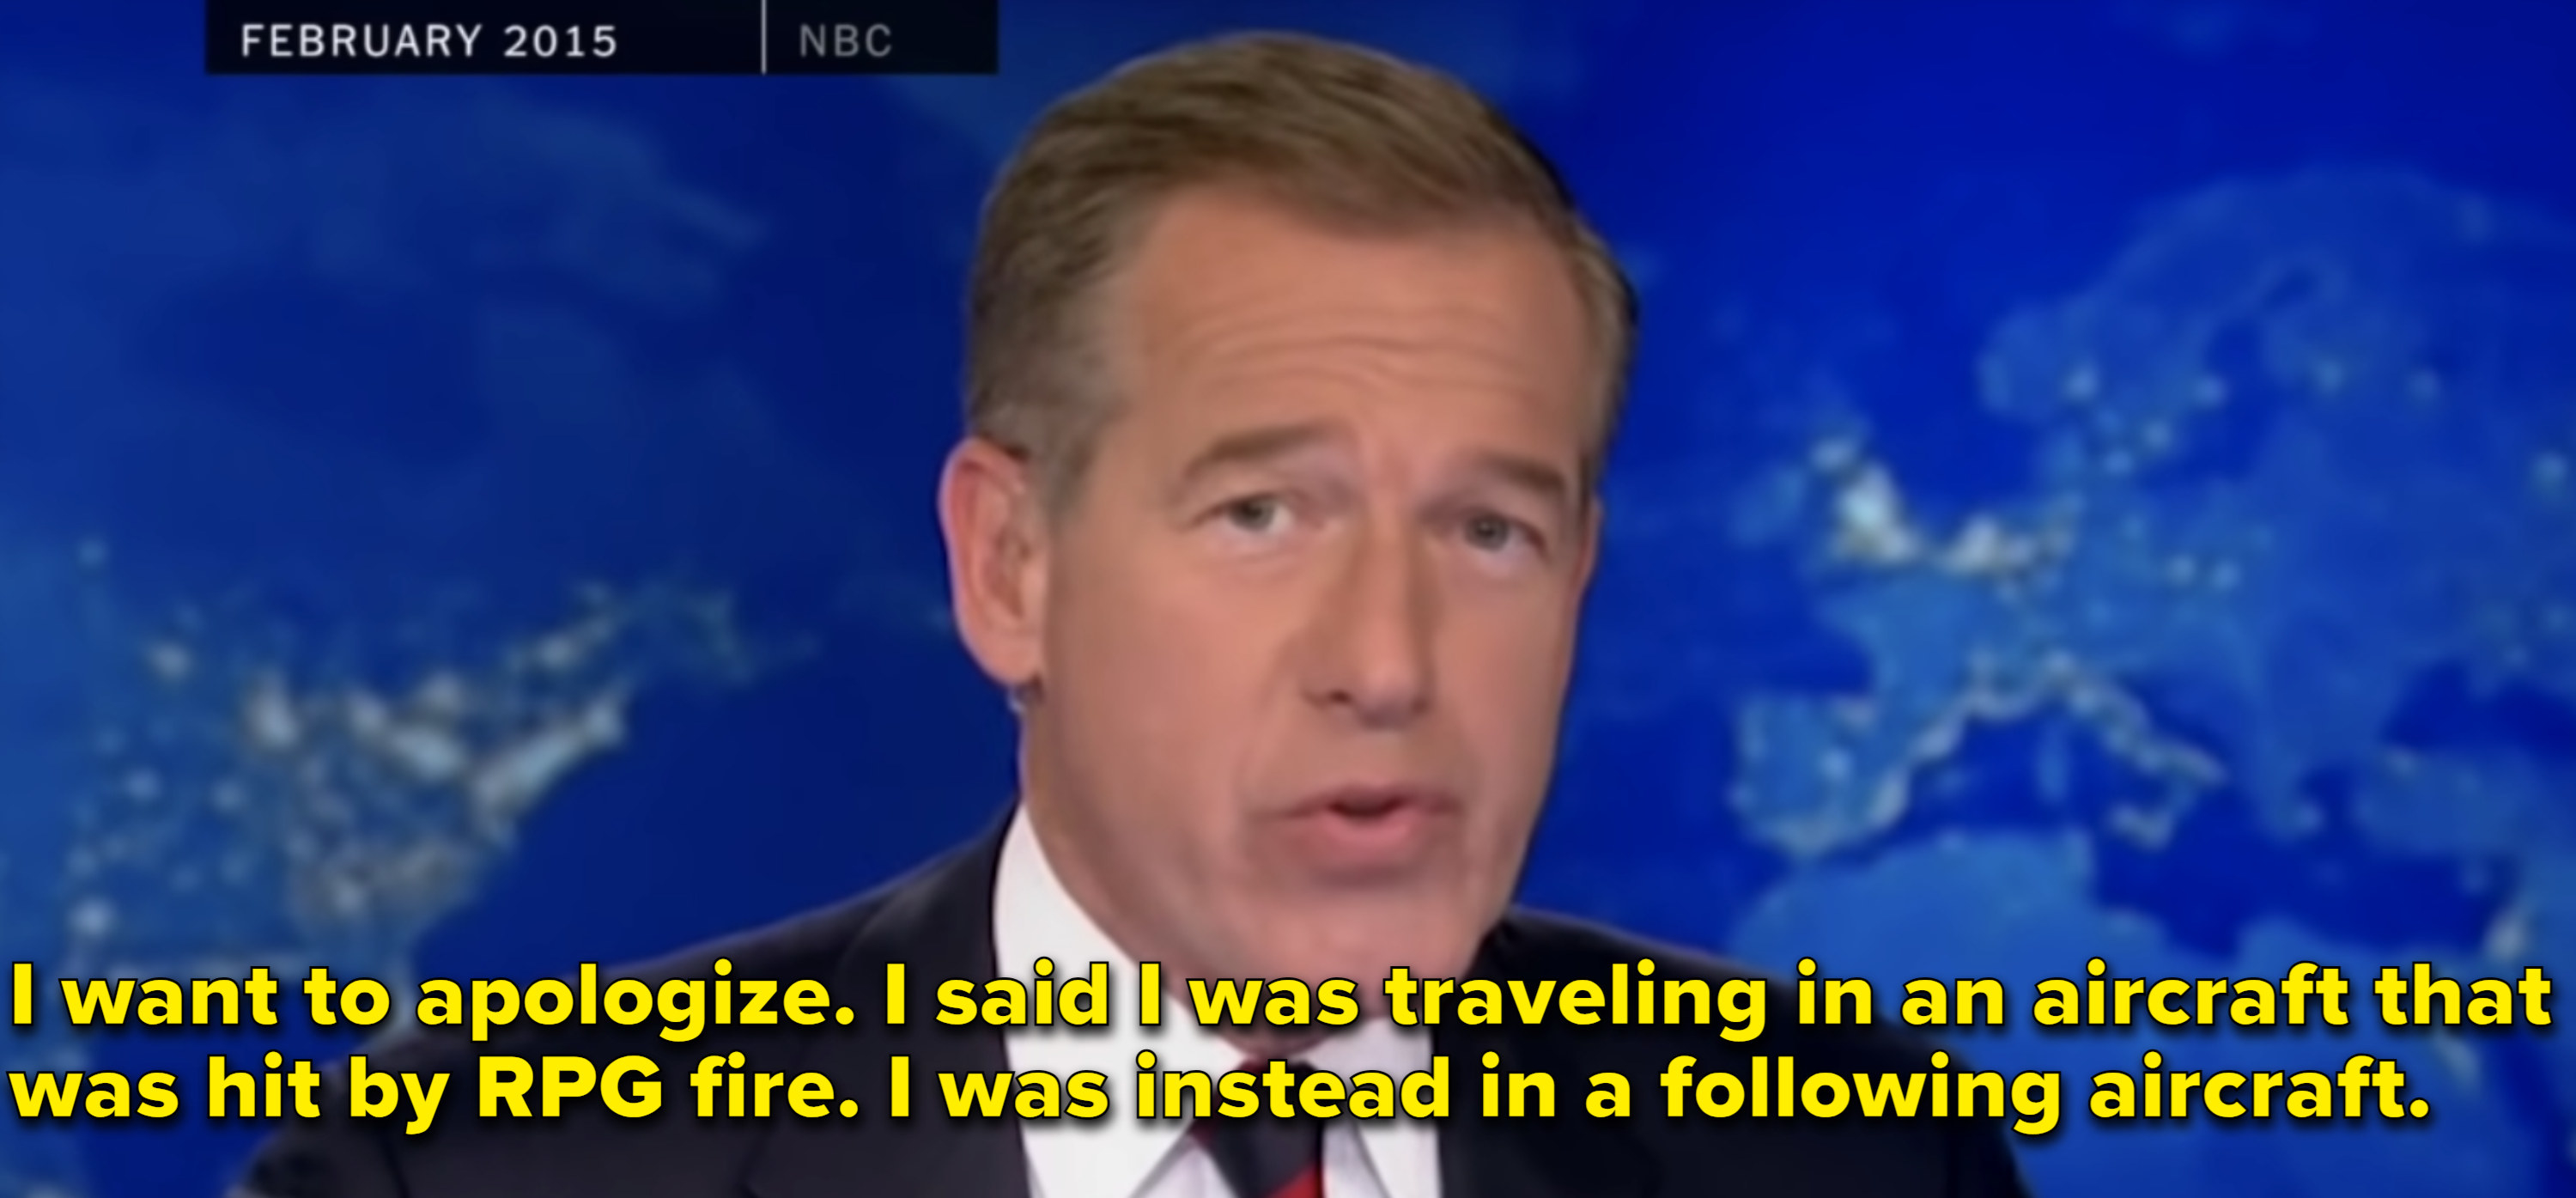 &quot;I want to apologize. I said I was traveling in an aircraft that was hit by RPG fire. I was instead in a following aircraft&quot;